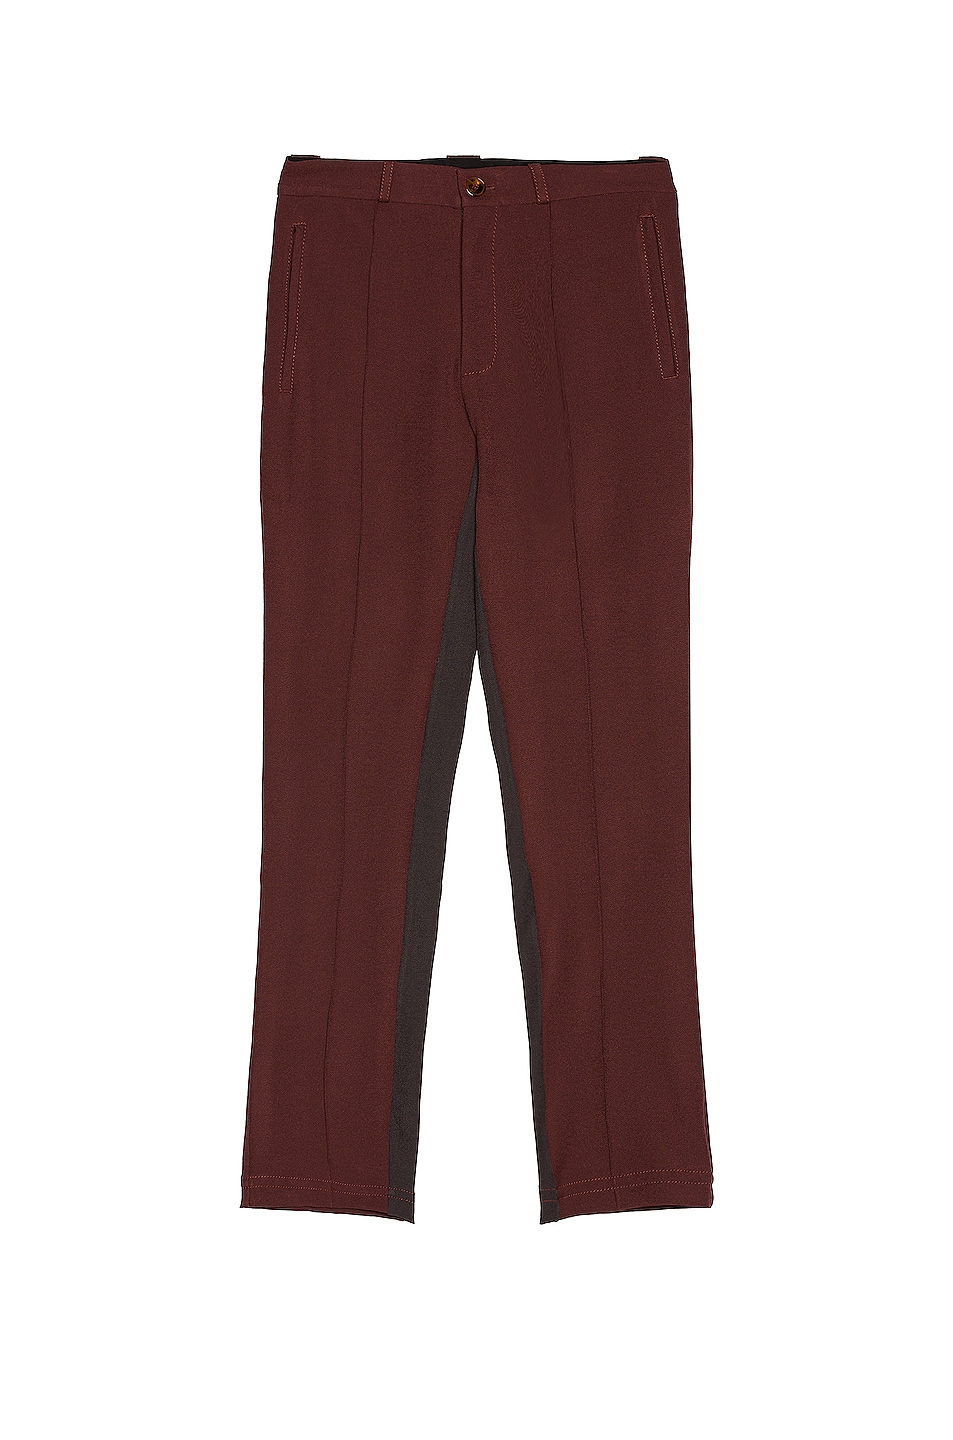 Image 1 of adidas by Wales Bonner Rock Pants in Mistery Brown